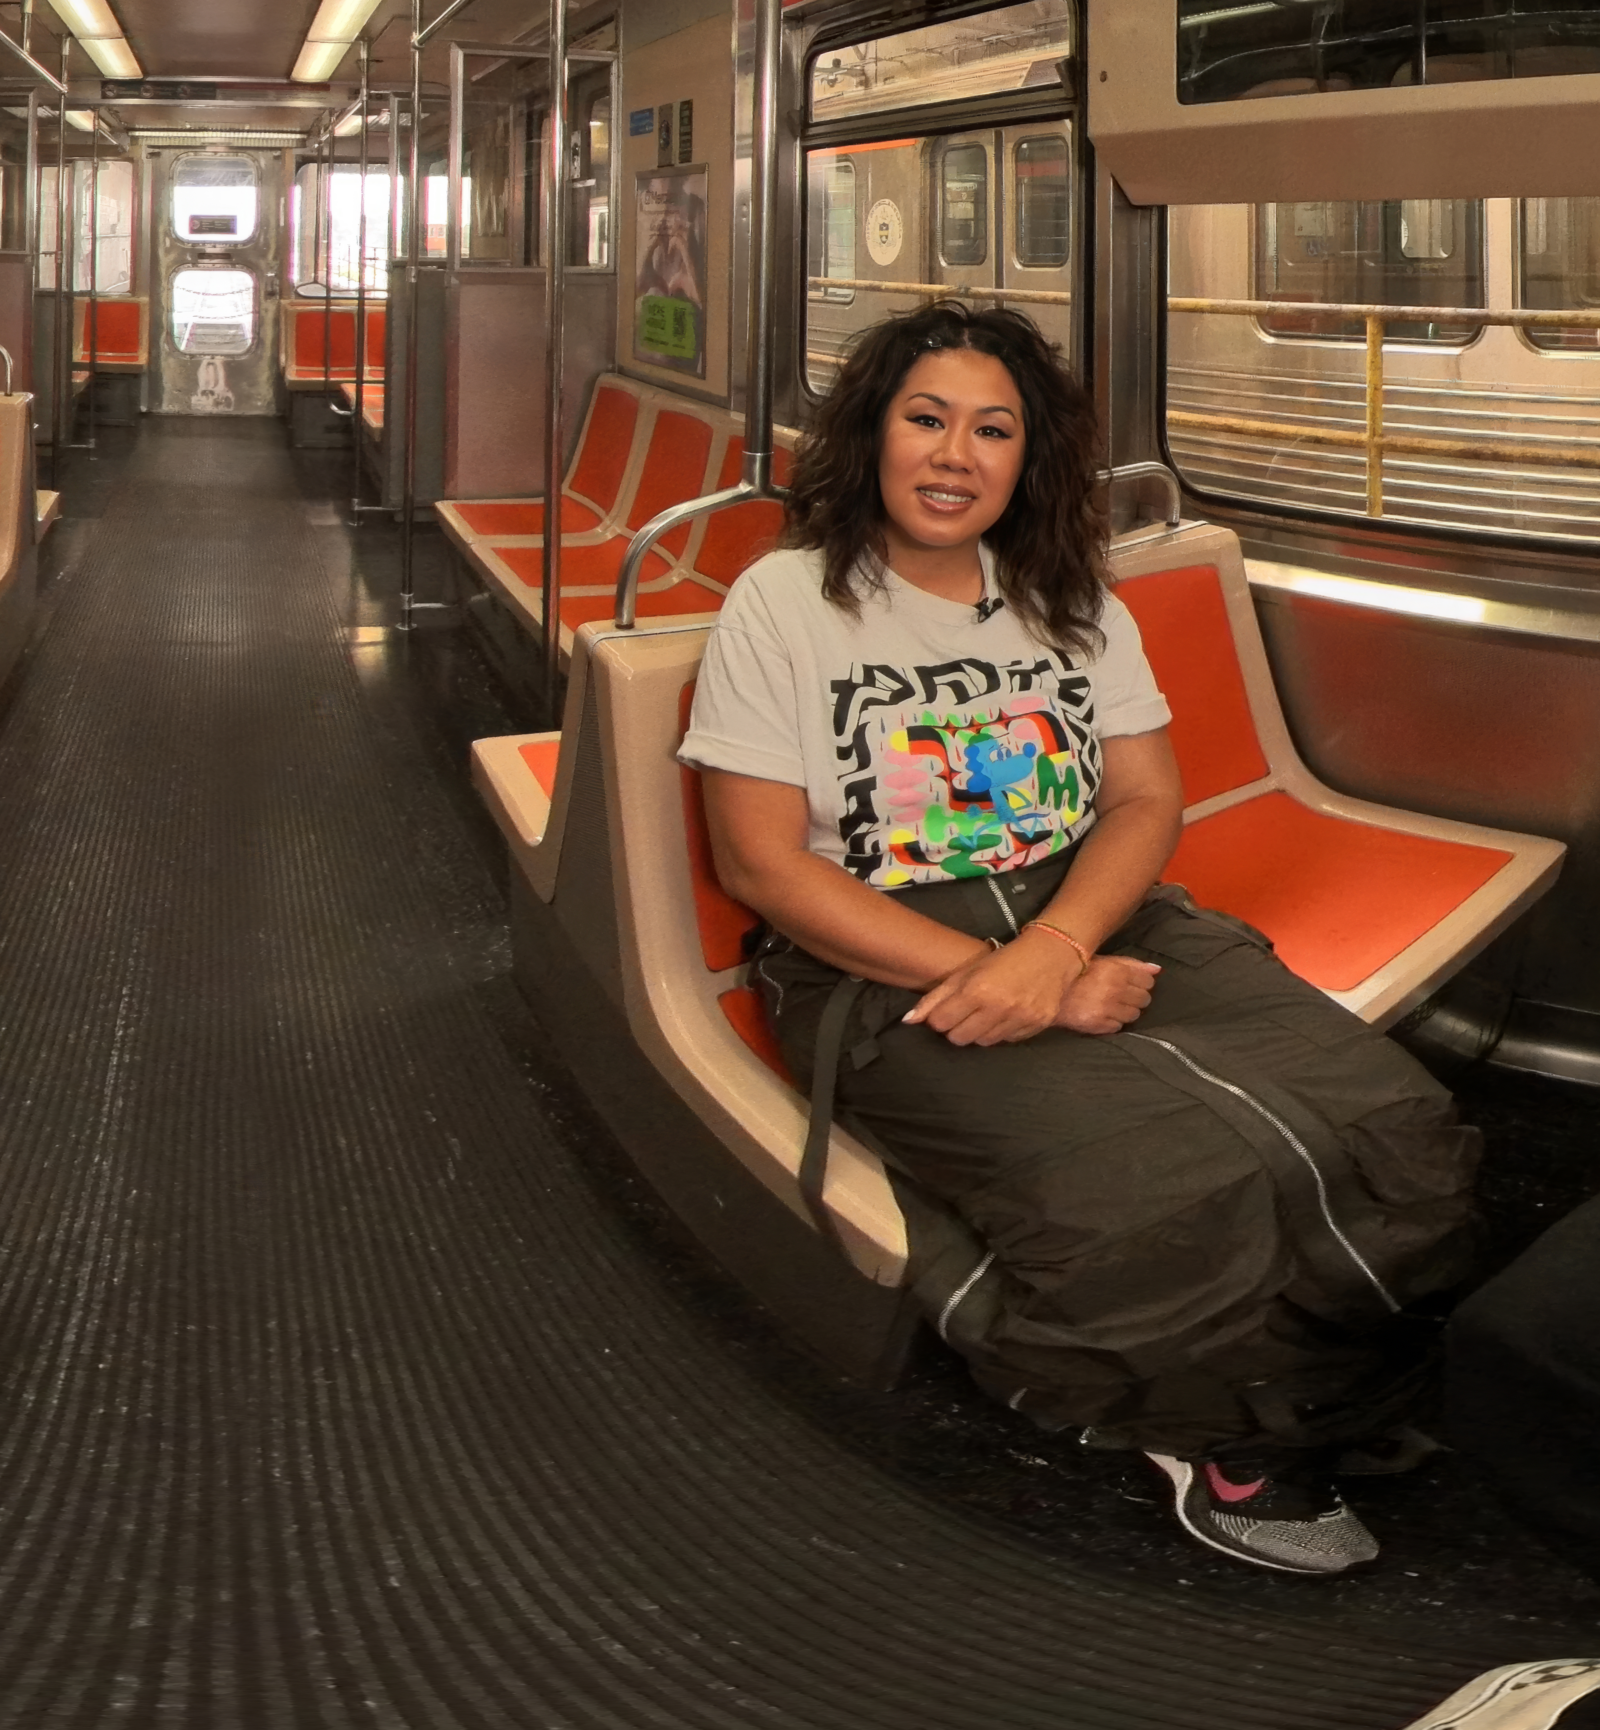 “Catzie” for Philly Daydreams: Stories in Transit, courtesy of Anula Shetty.